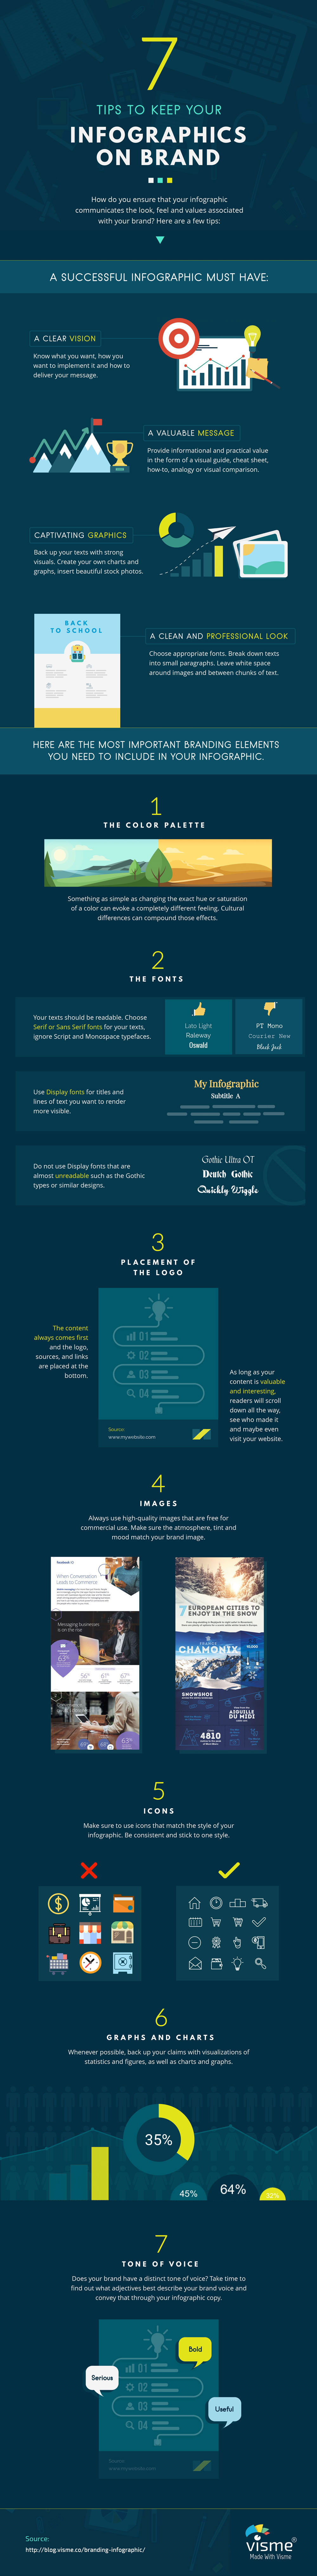 branding infographic 7 Tips to Keep Your Infographics on Brand Infographic